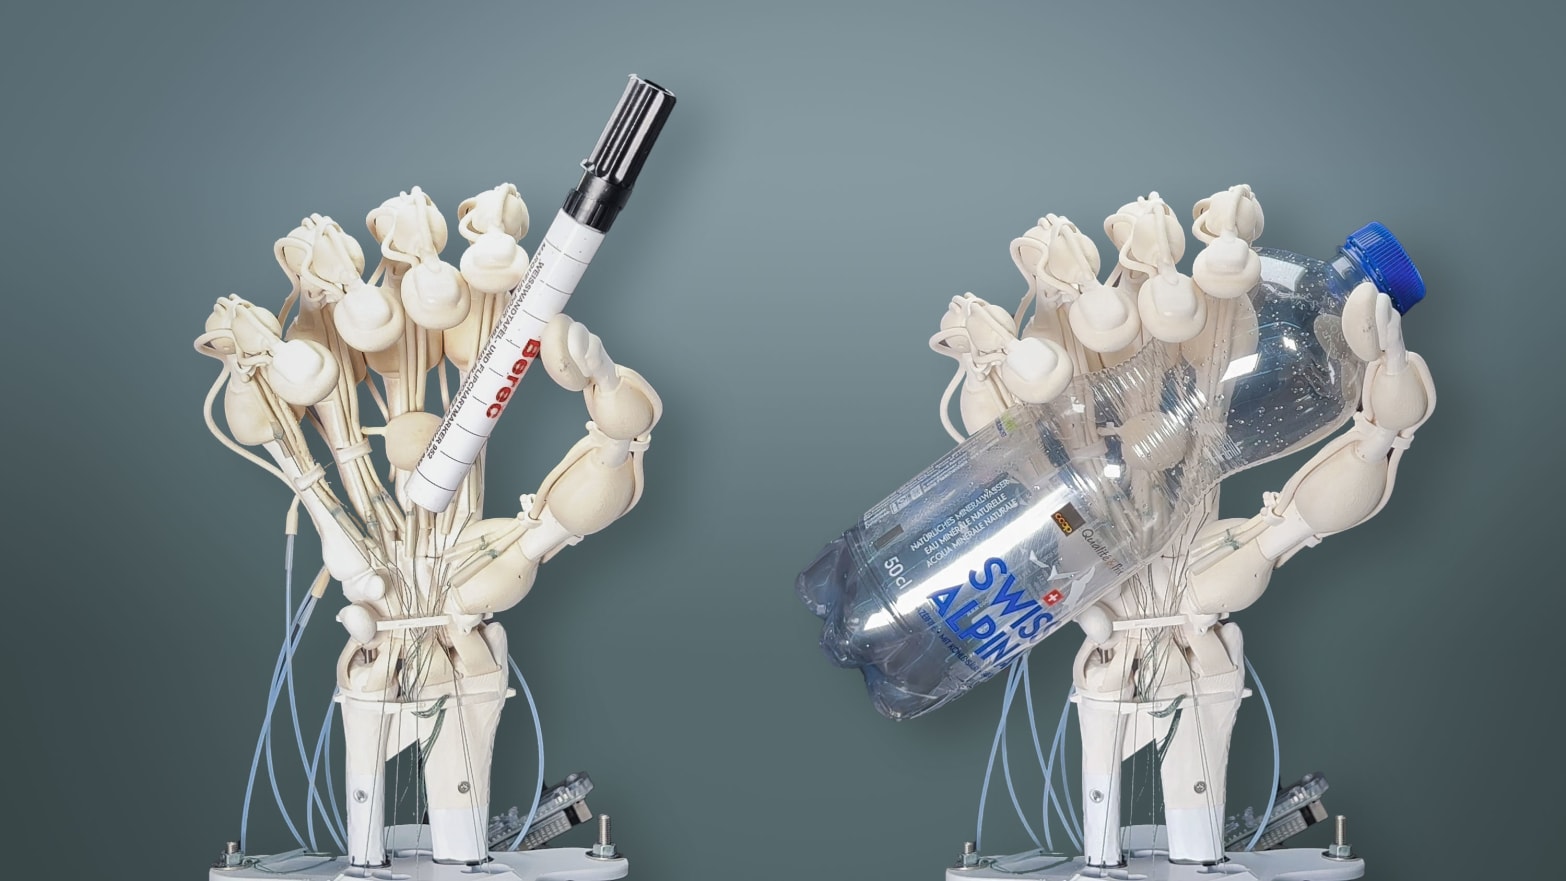 This 3D Printer From MIT Spits Out Bones and Tendons